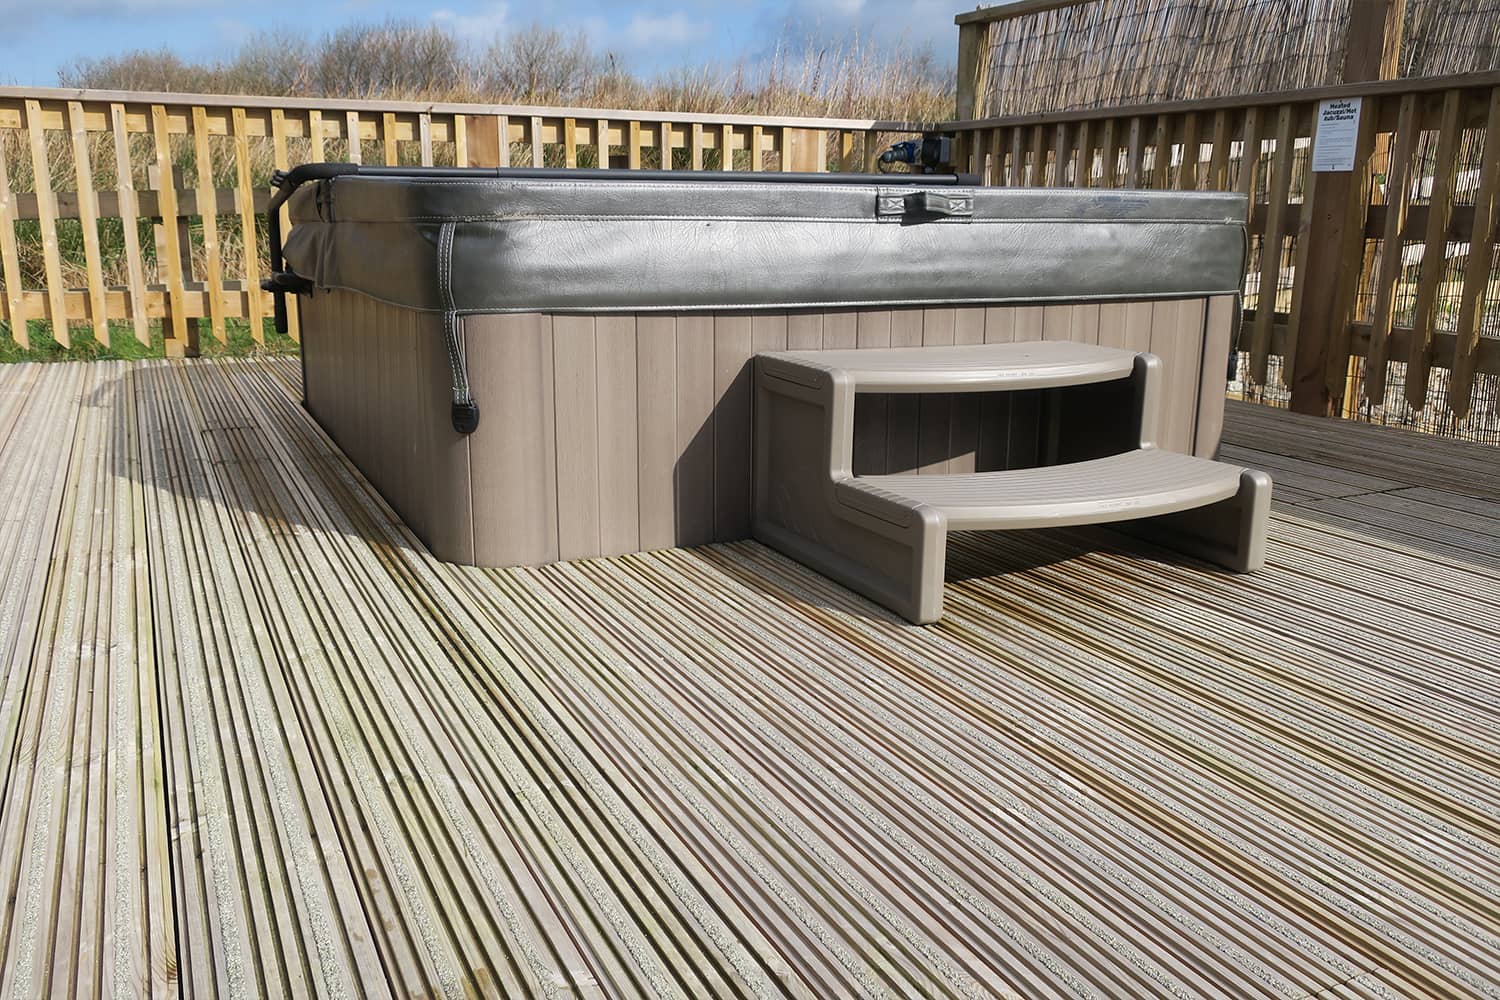 Why Timber Decking is Ideal for Hot Tubs